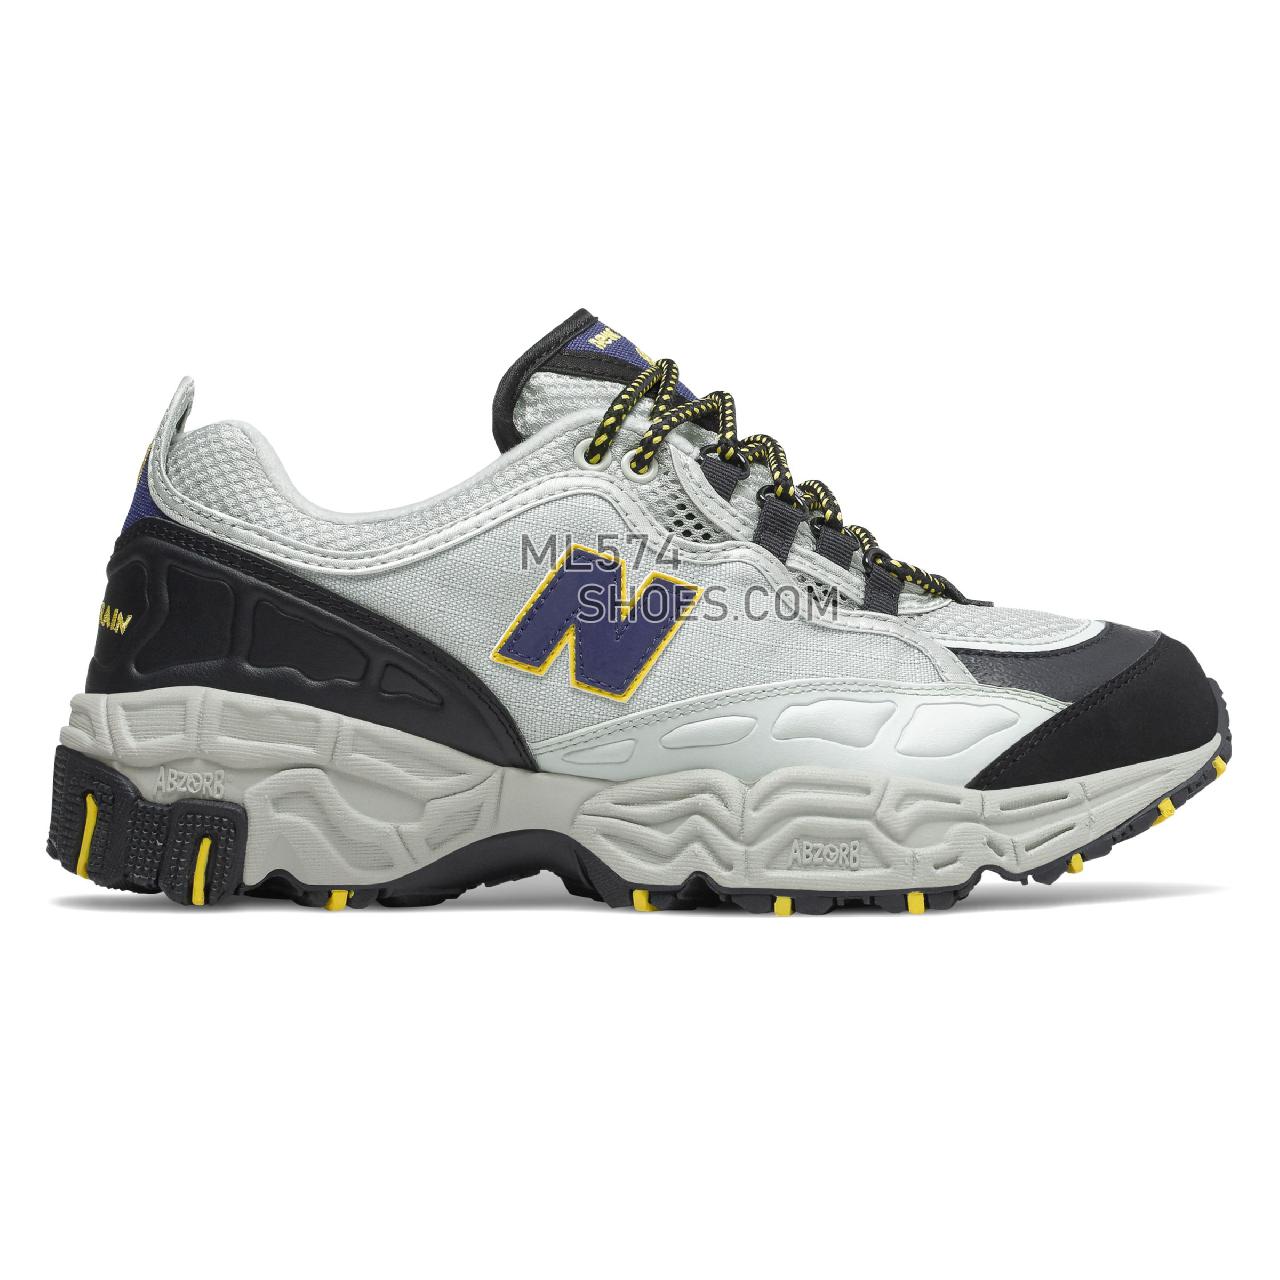 New Balance 801 - Men's Trail Running - Grey with Black and Yellow - M801AT